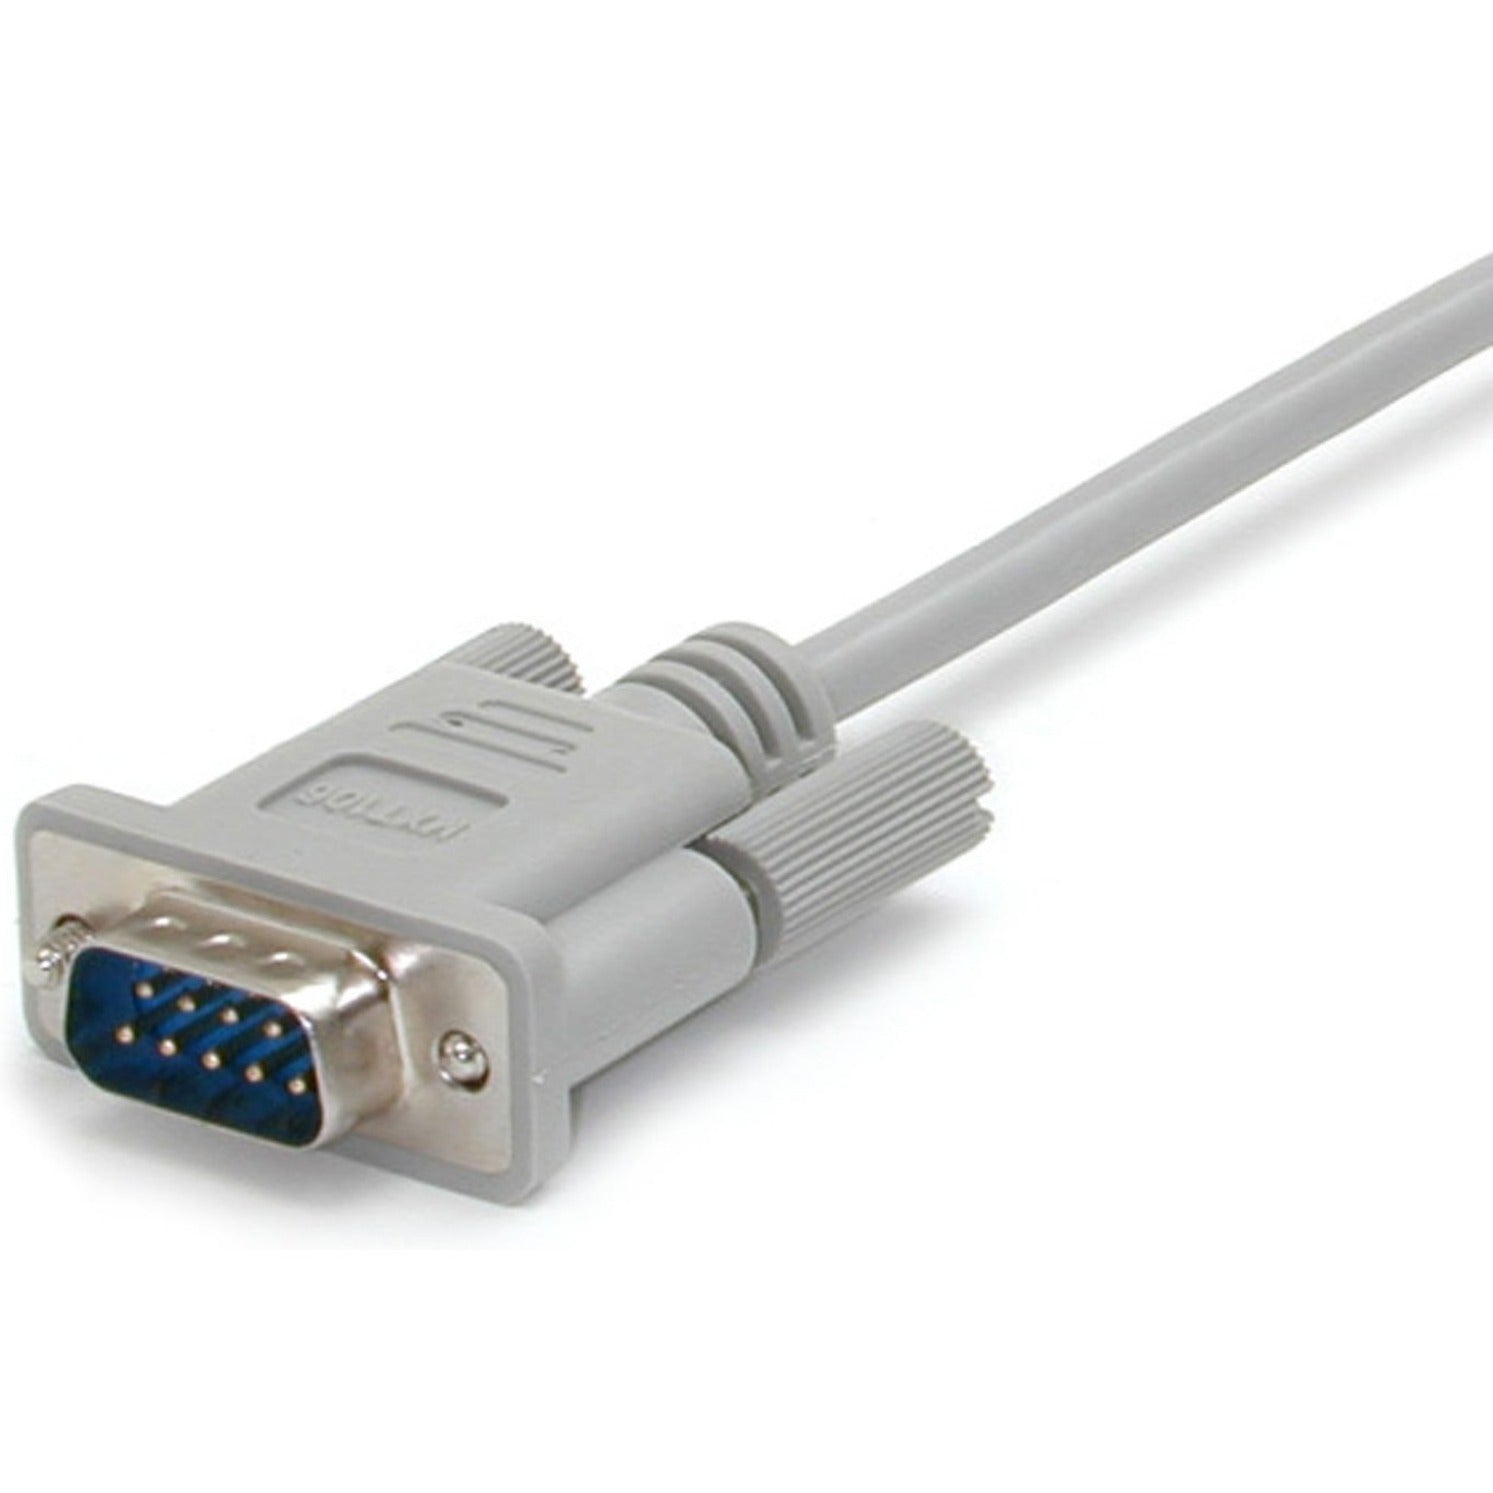 StarTech.com MXT106 15ft Straight Through DB9 Serial Cable - Mouse Extension Cable External, Gray